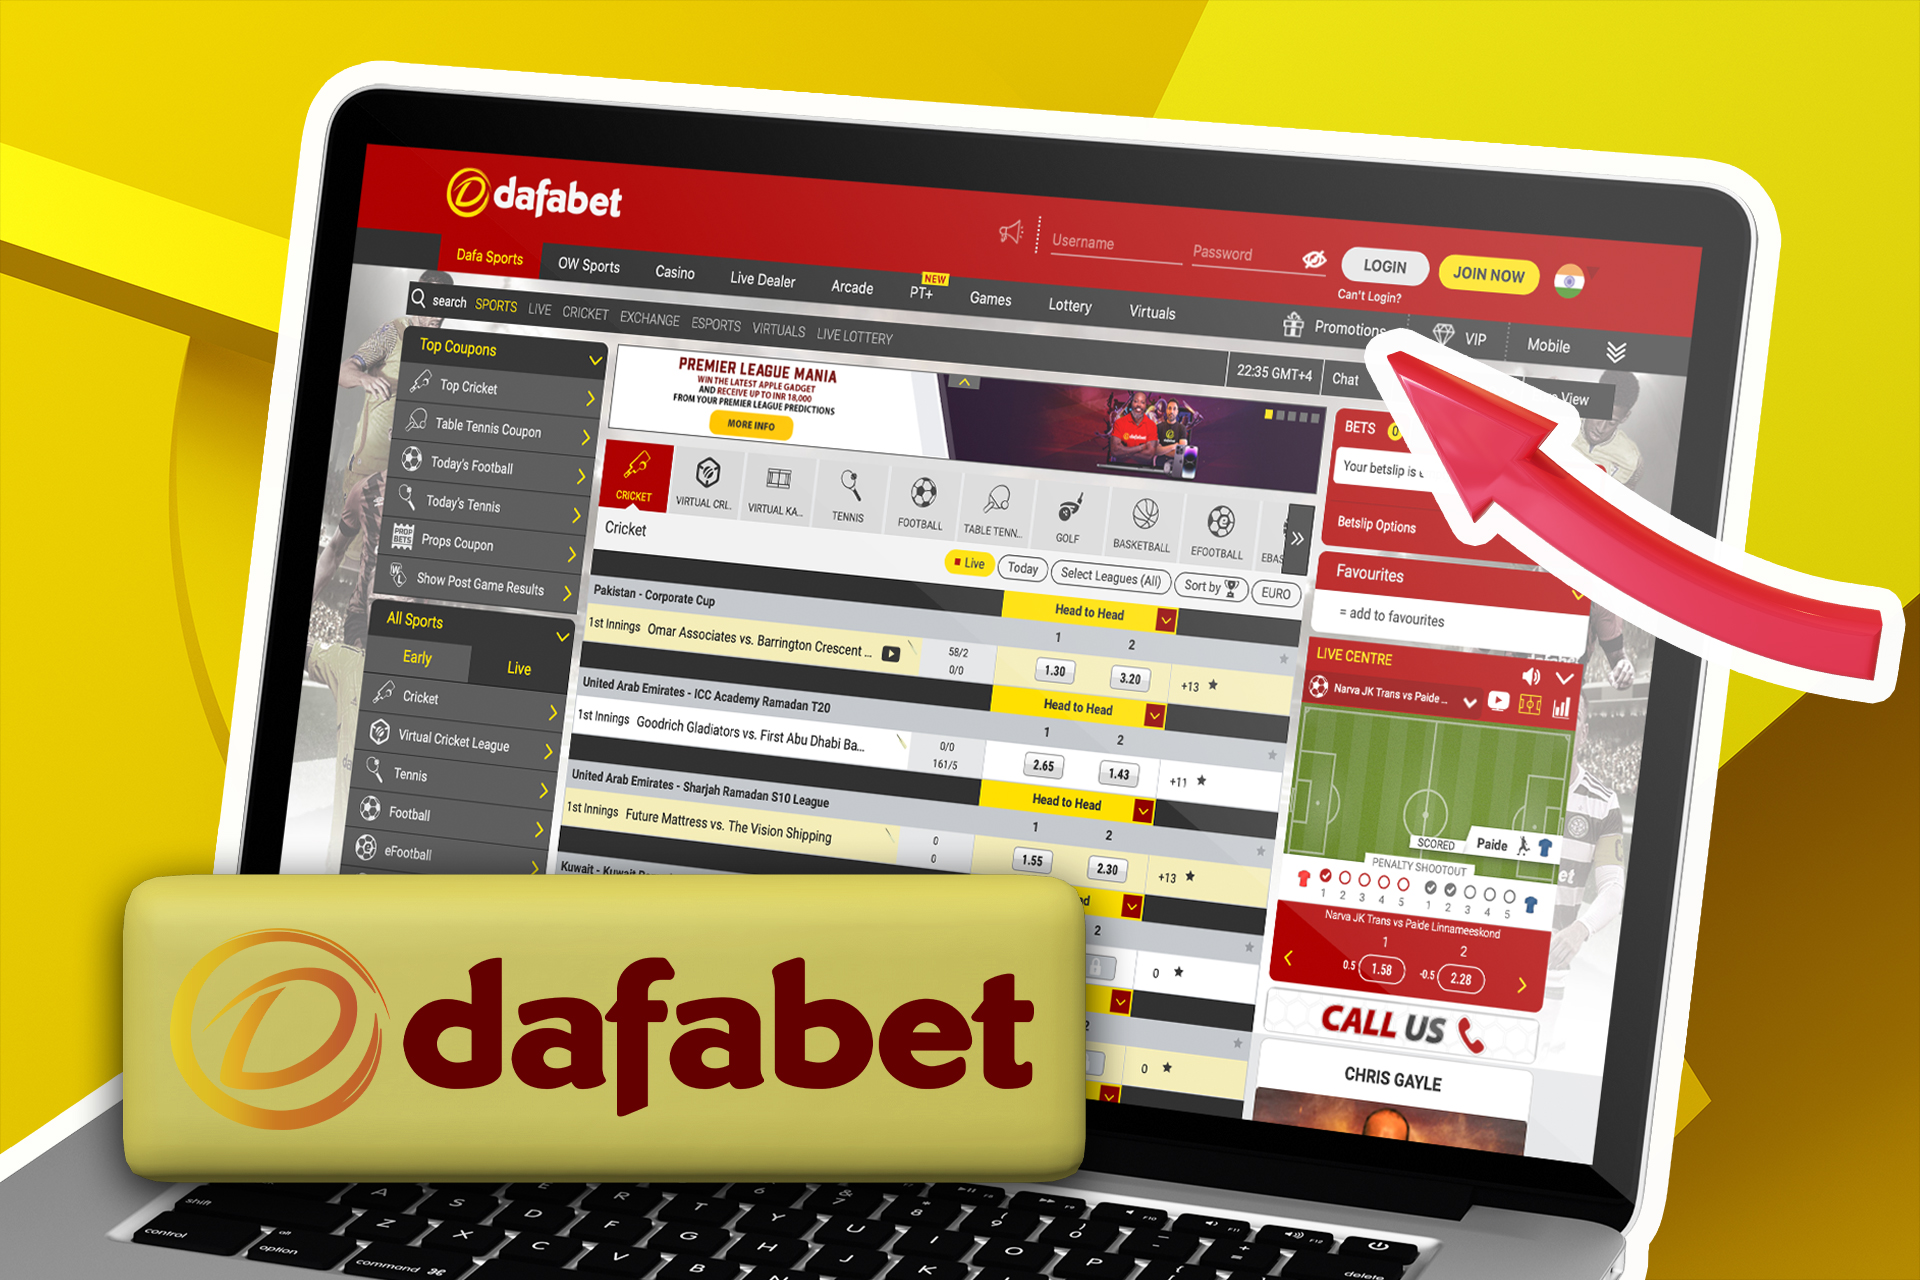 Enter your username and password to log in to Dafabet.